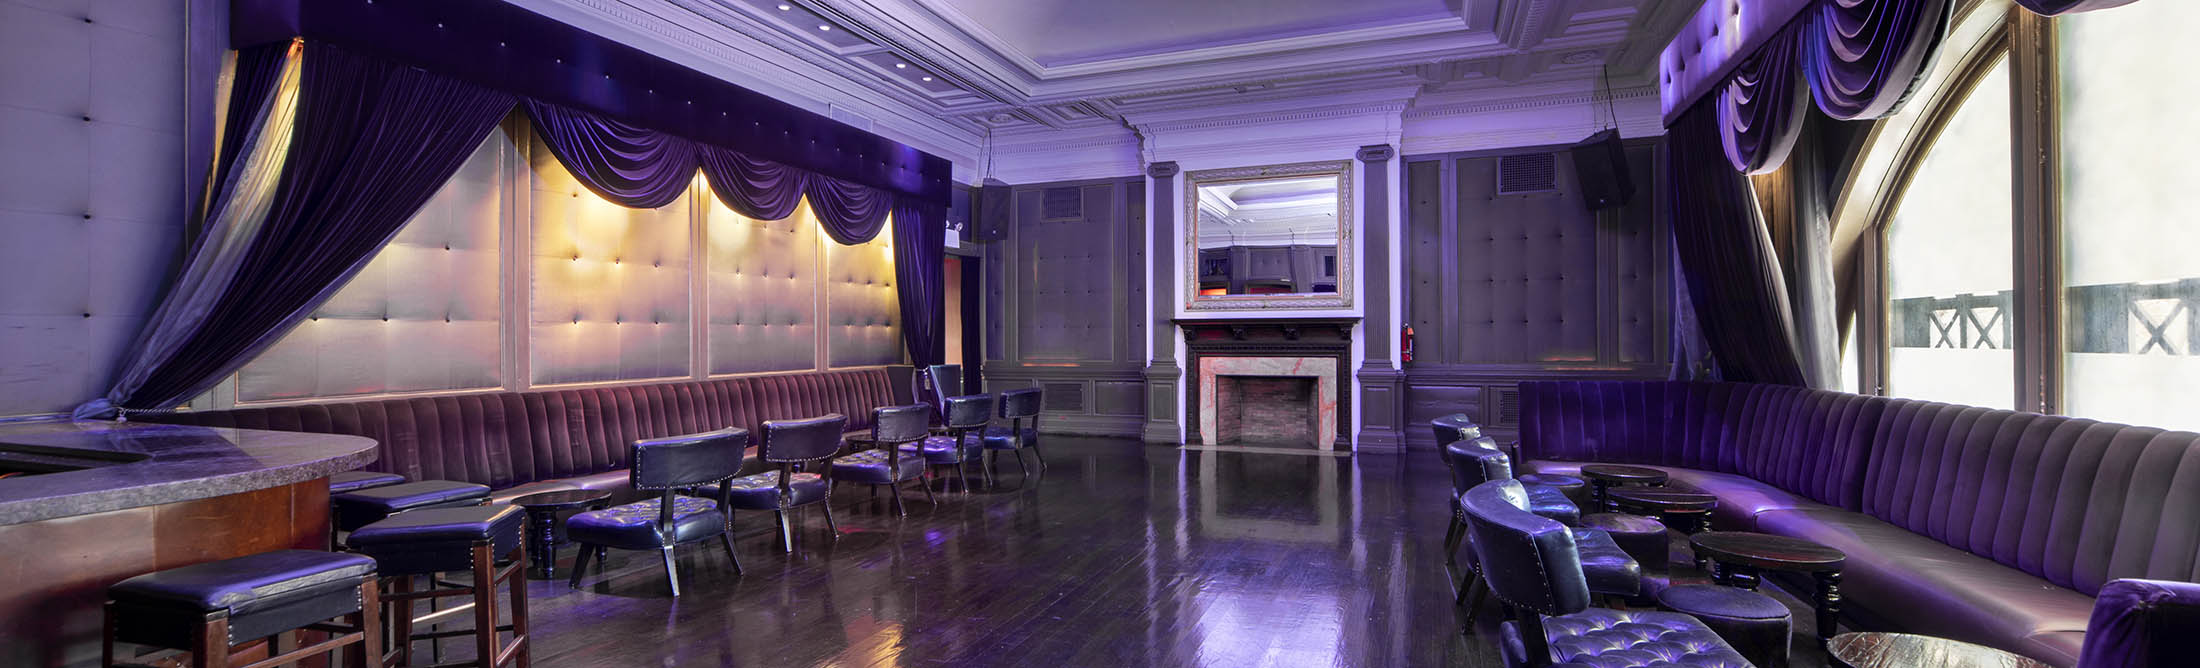 New York Event Space Capitale Heads To Auction For Sale